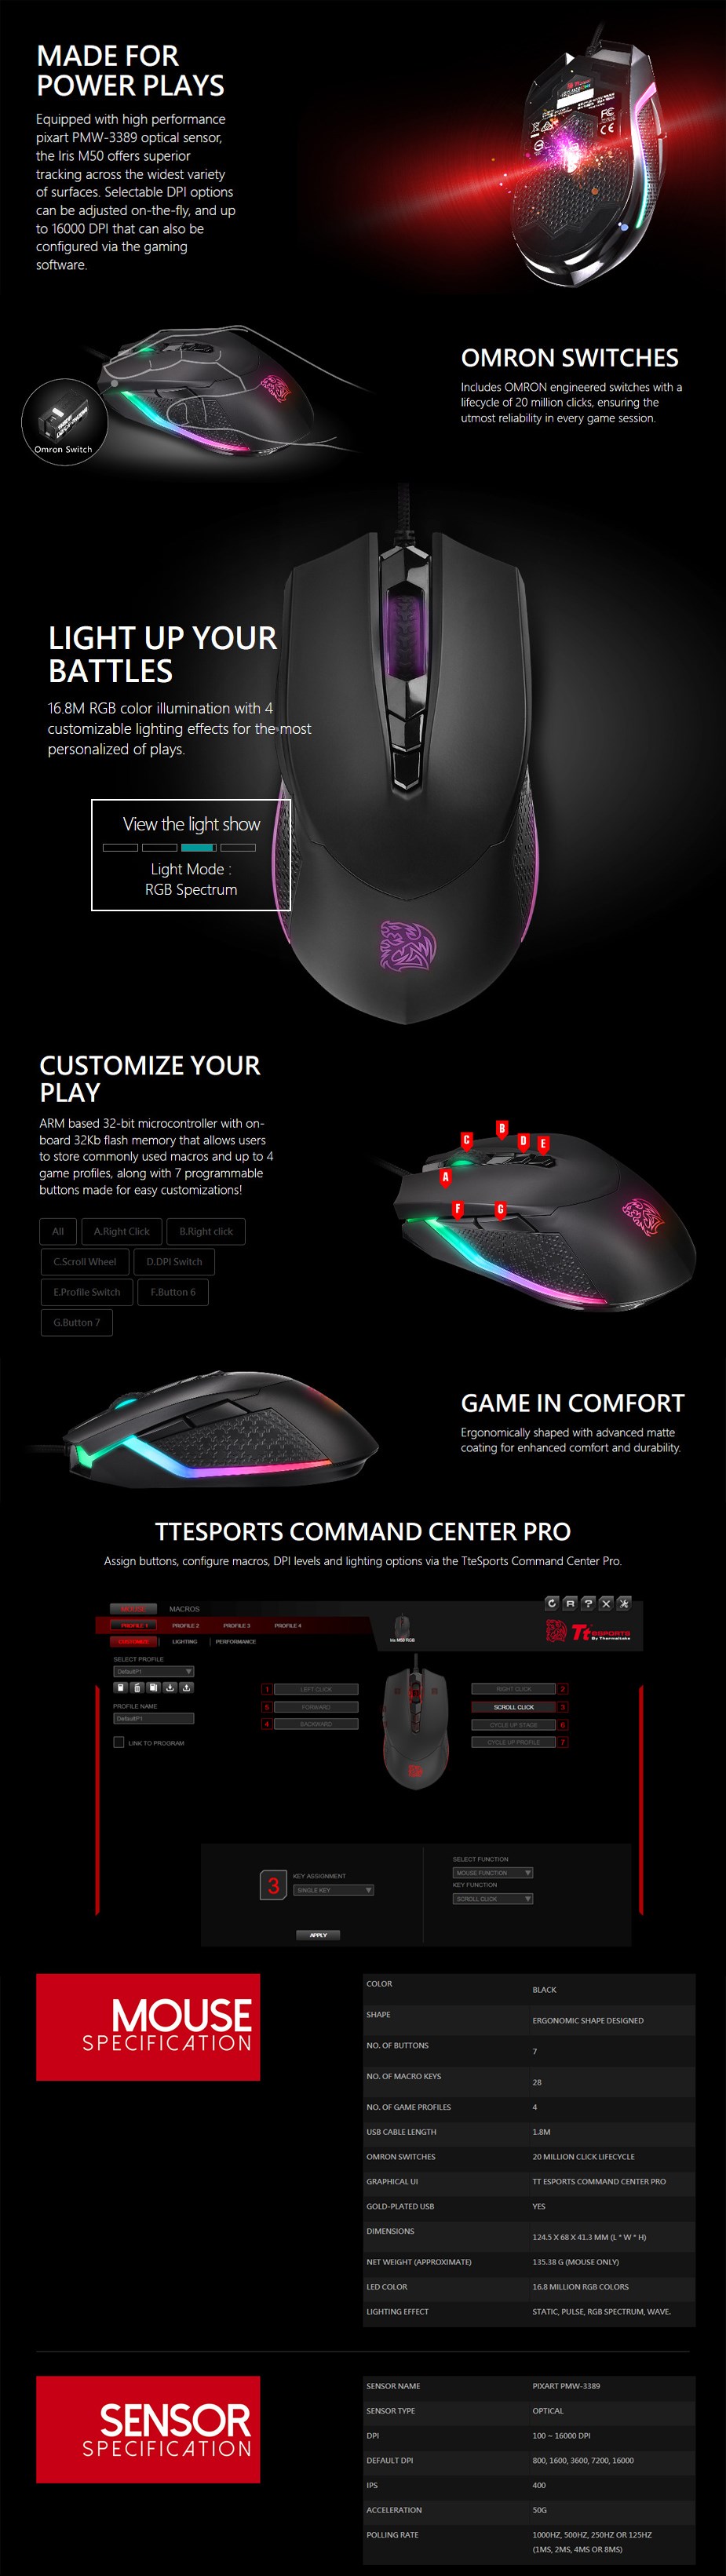 Thermaltake Tt eSPORTS Iris M50 RGB 16000 DPI Optical Wired Gaming Mouse - Overview 1